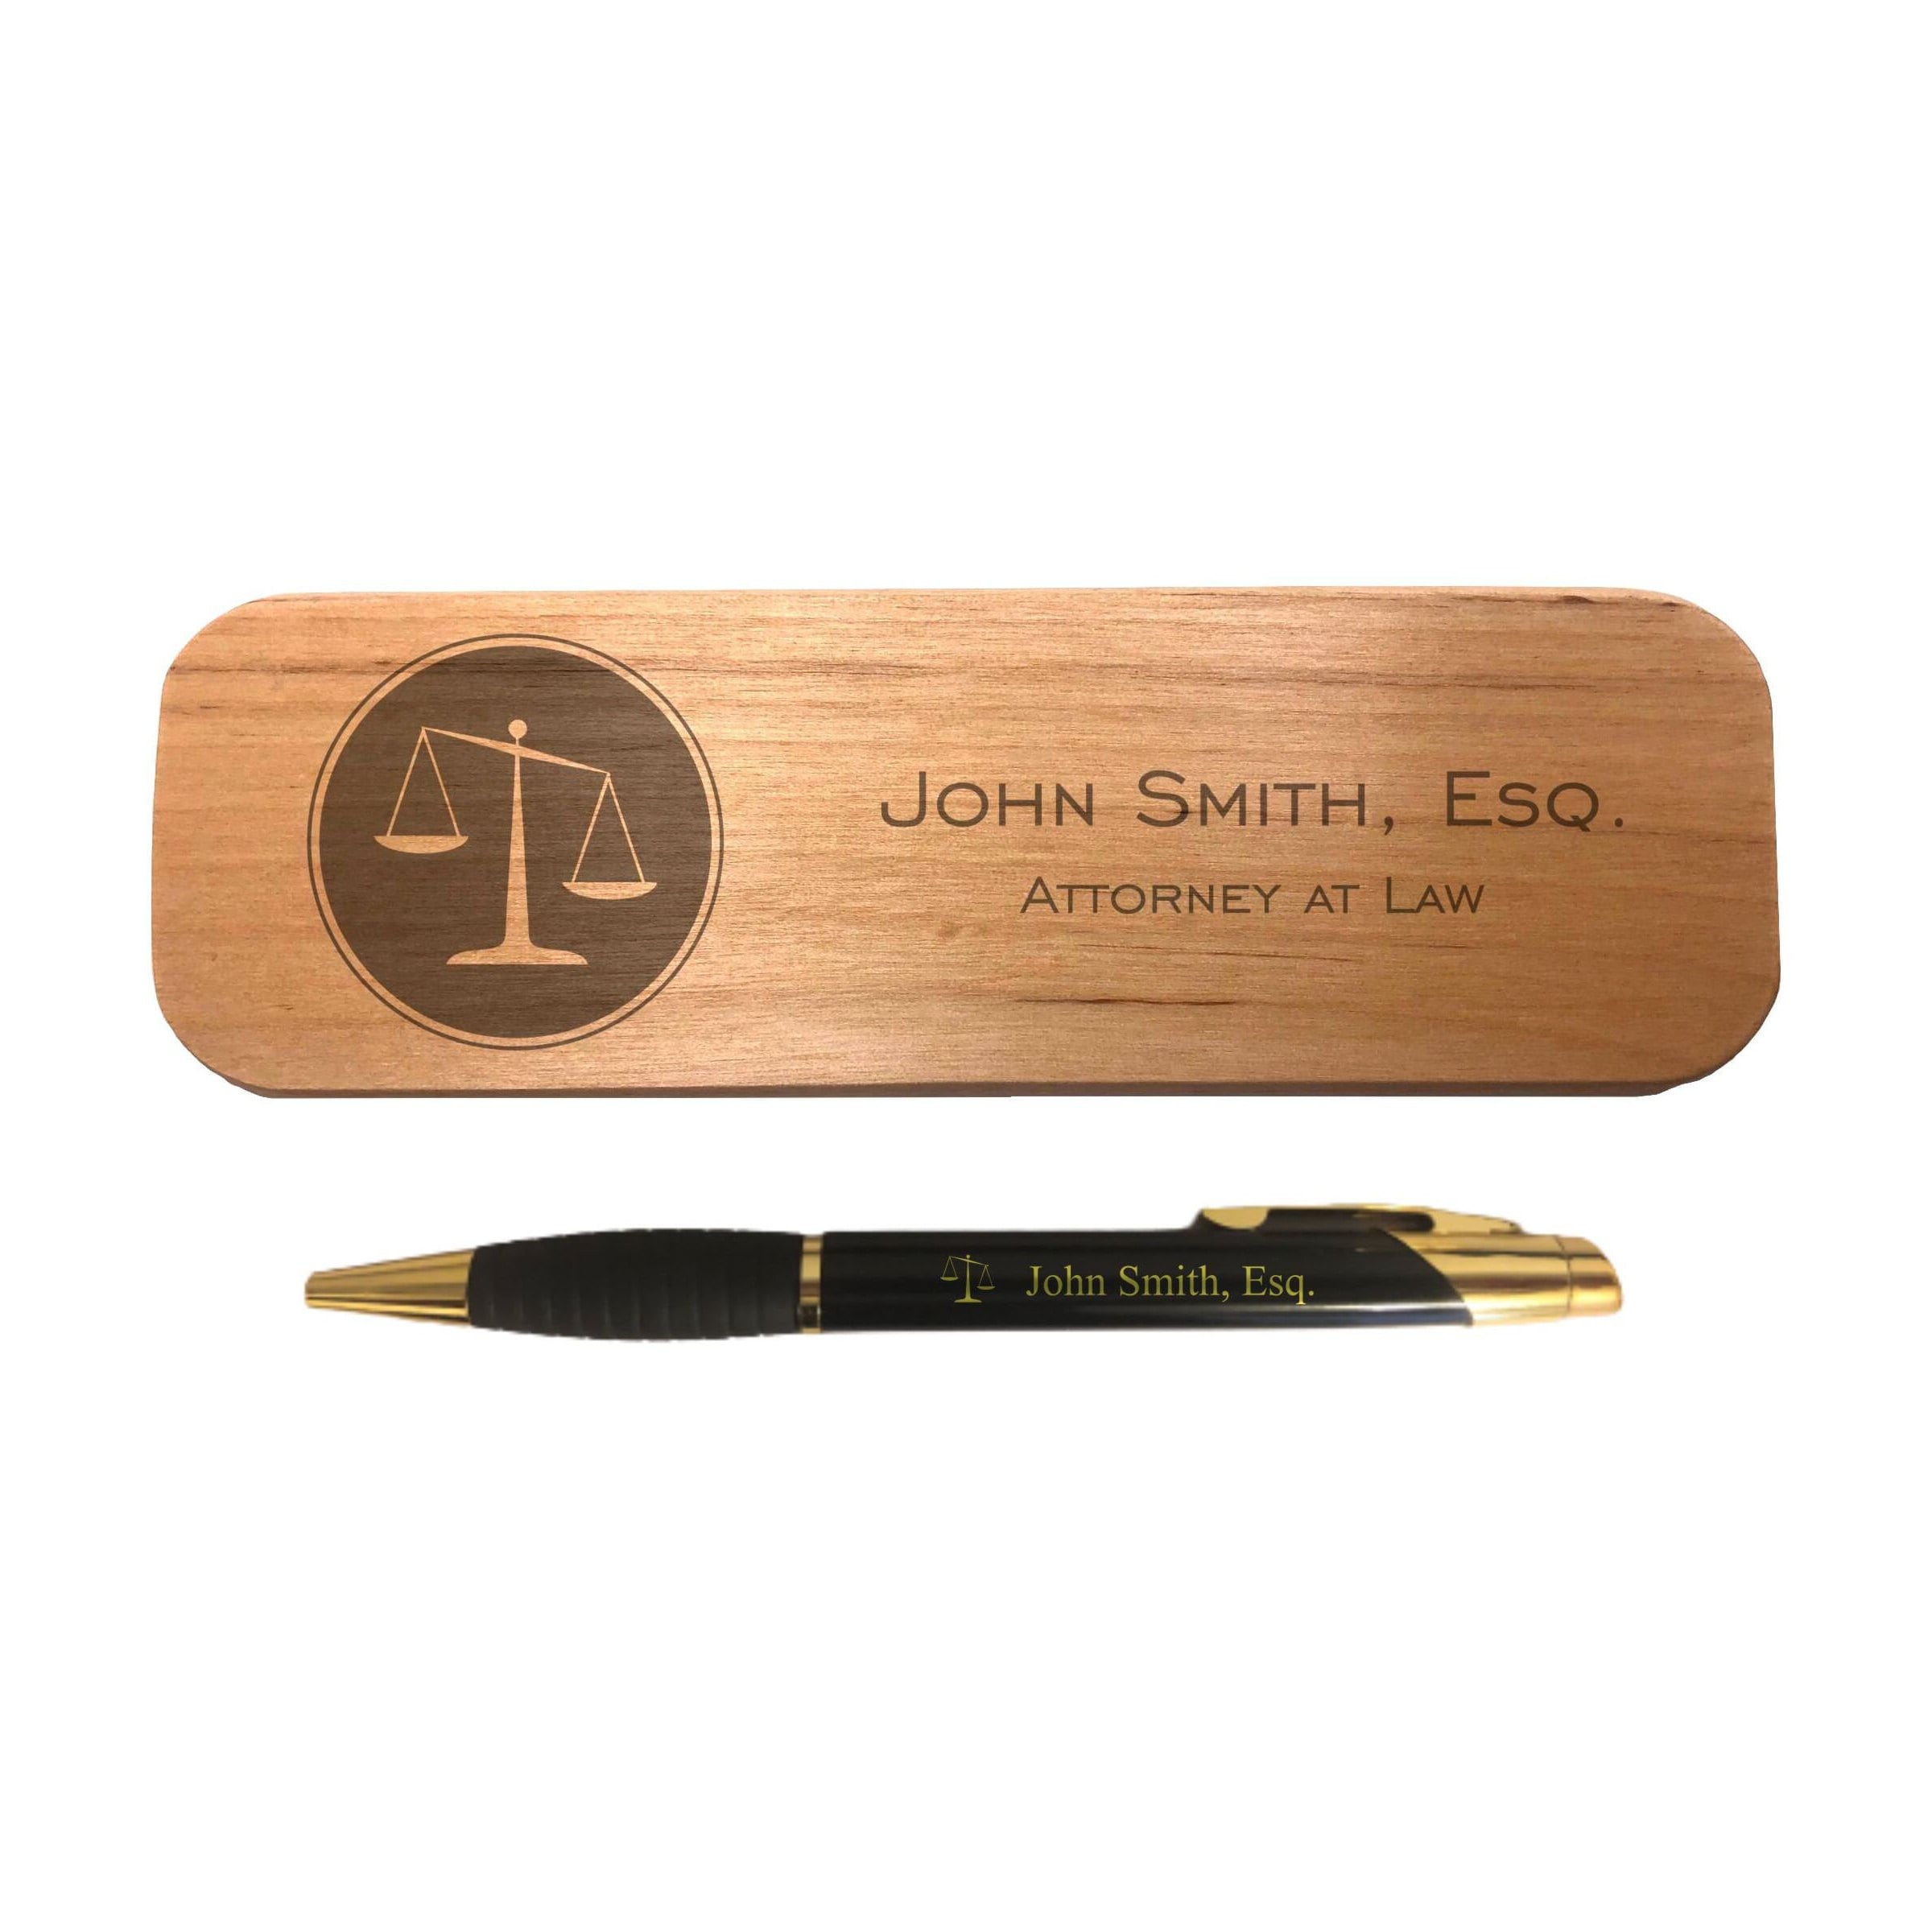 Lucky Bar Exam Pencil Set 6 Engraved Pencils. Stars. Future Lawyer, These  Are for You. Stocking Stuffer for Future Lawyers 